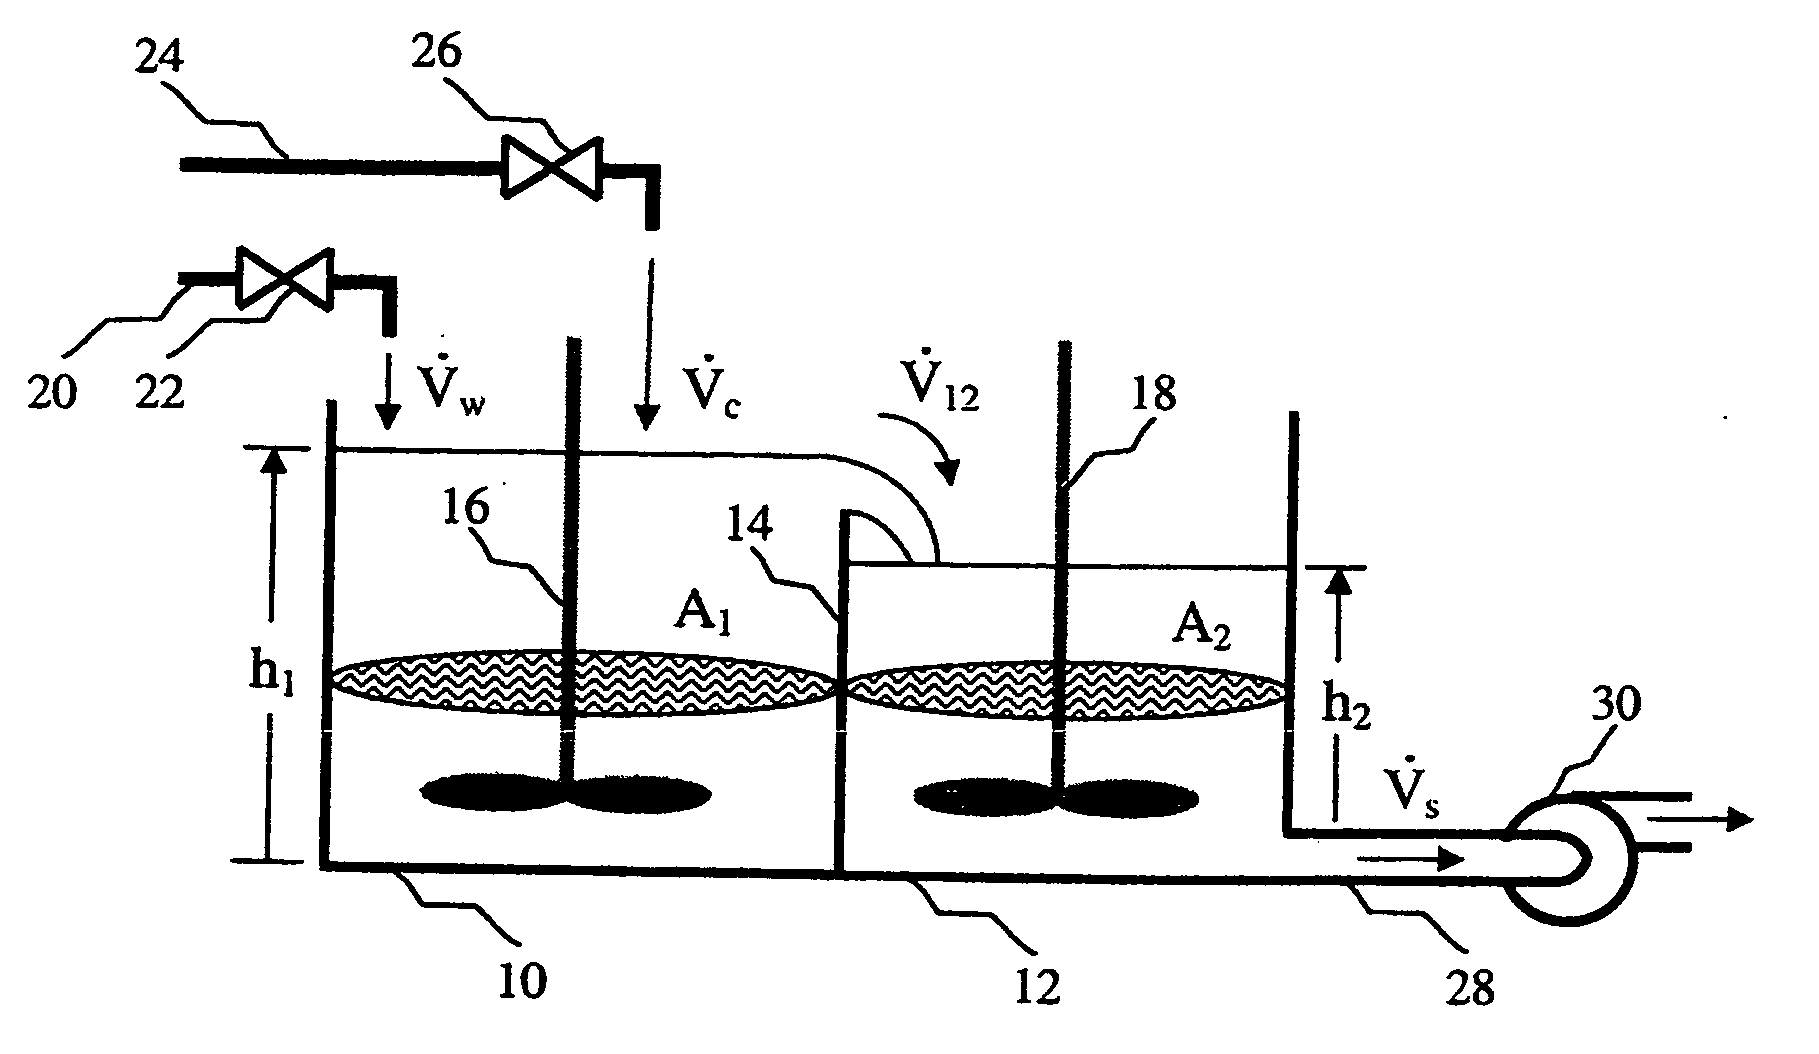 Systems for determining a volumetric ratio of a material to the total materials in a mixing vessel